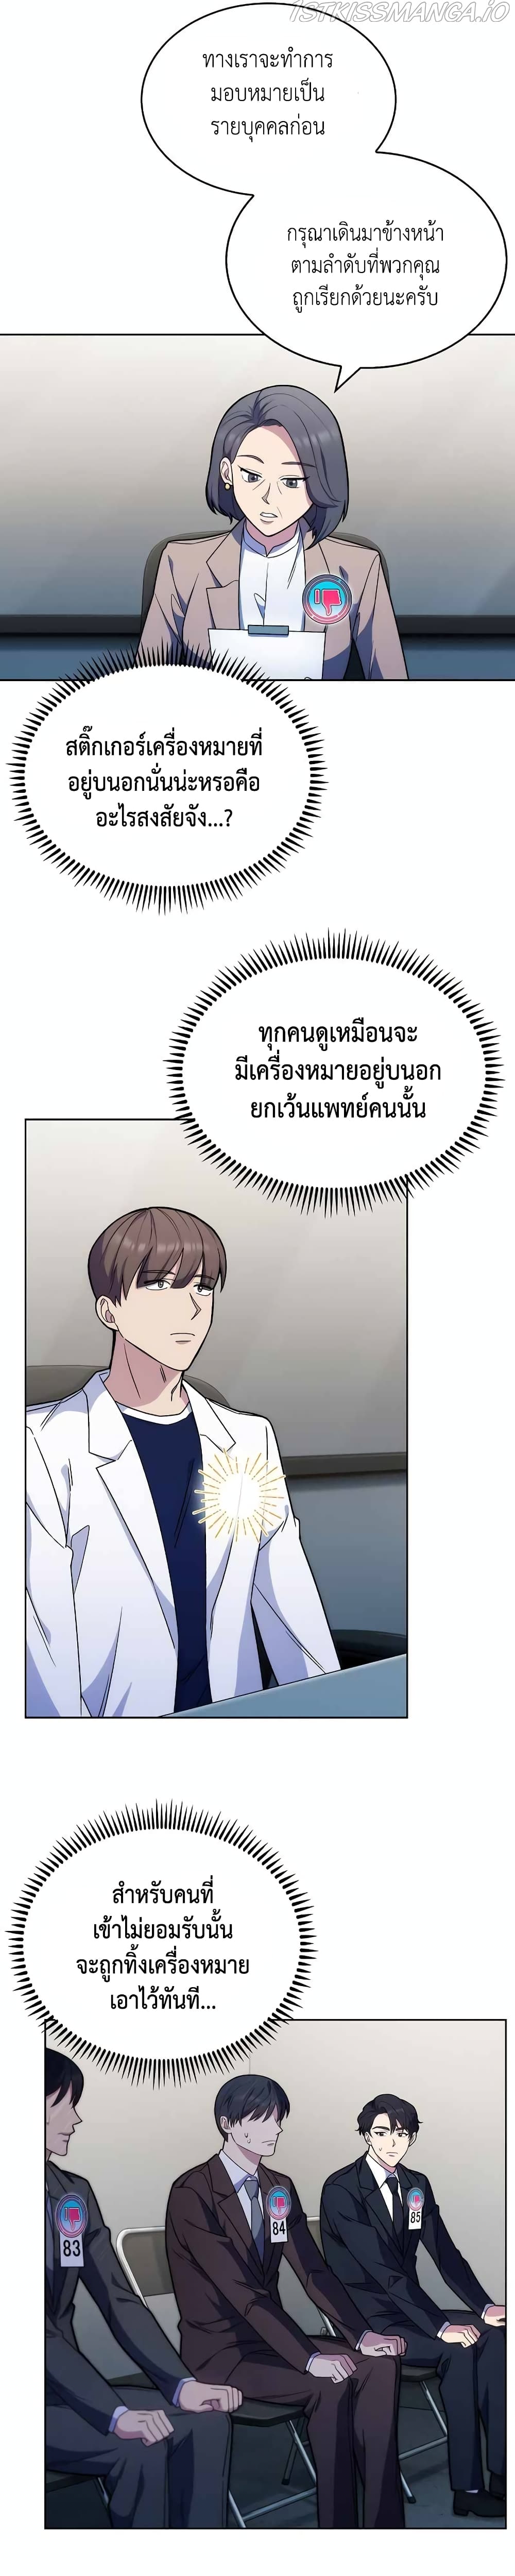 Level-Up Doctor 10-10